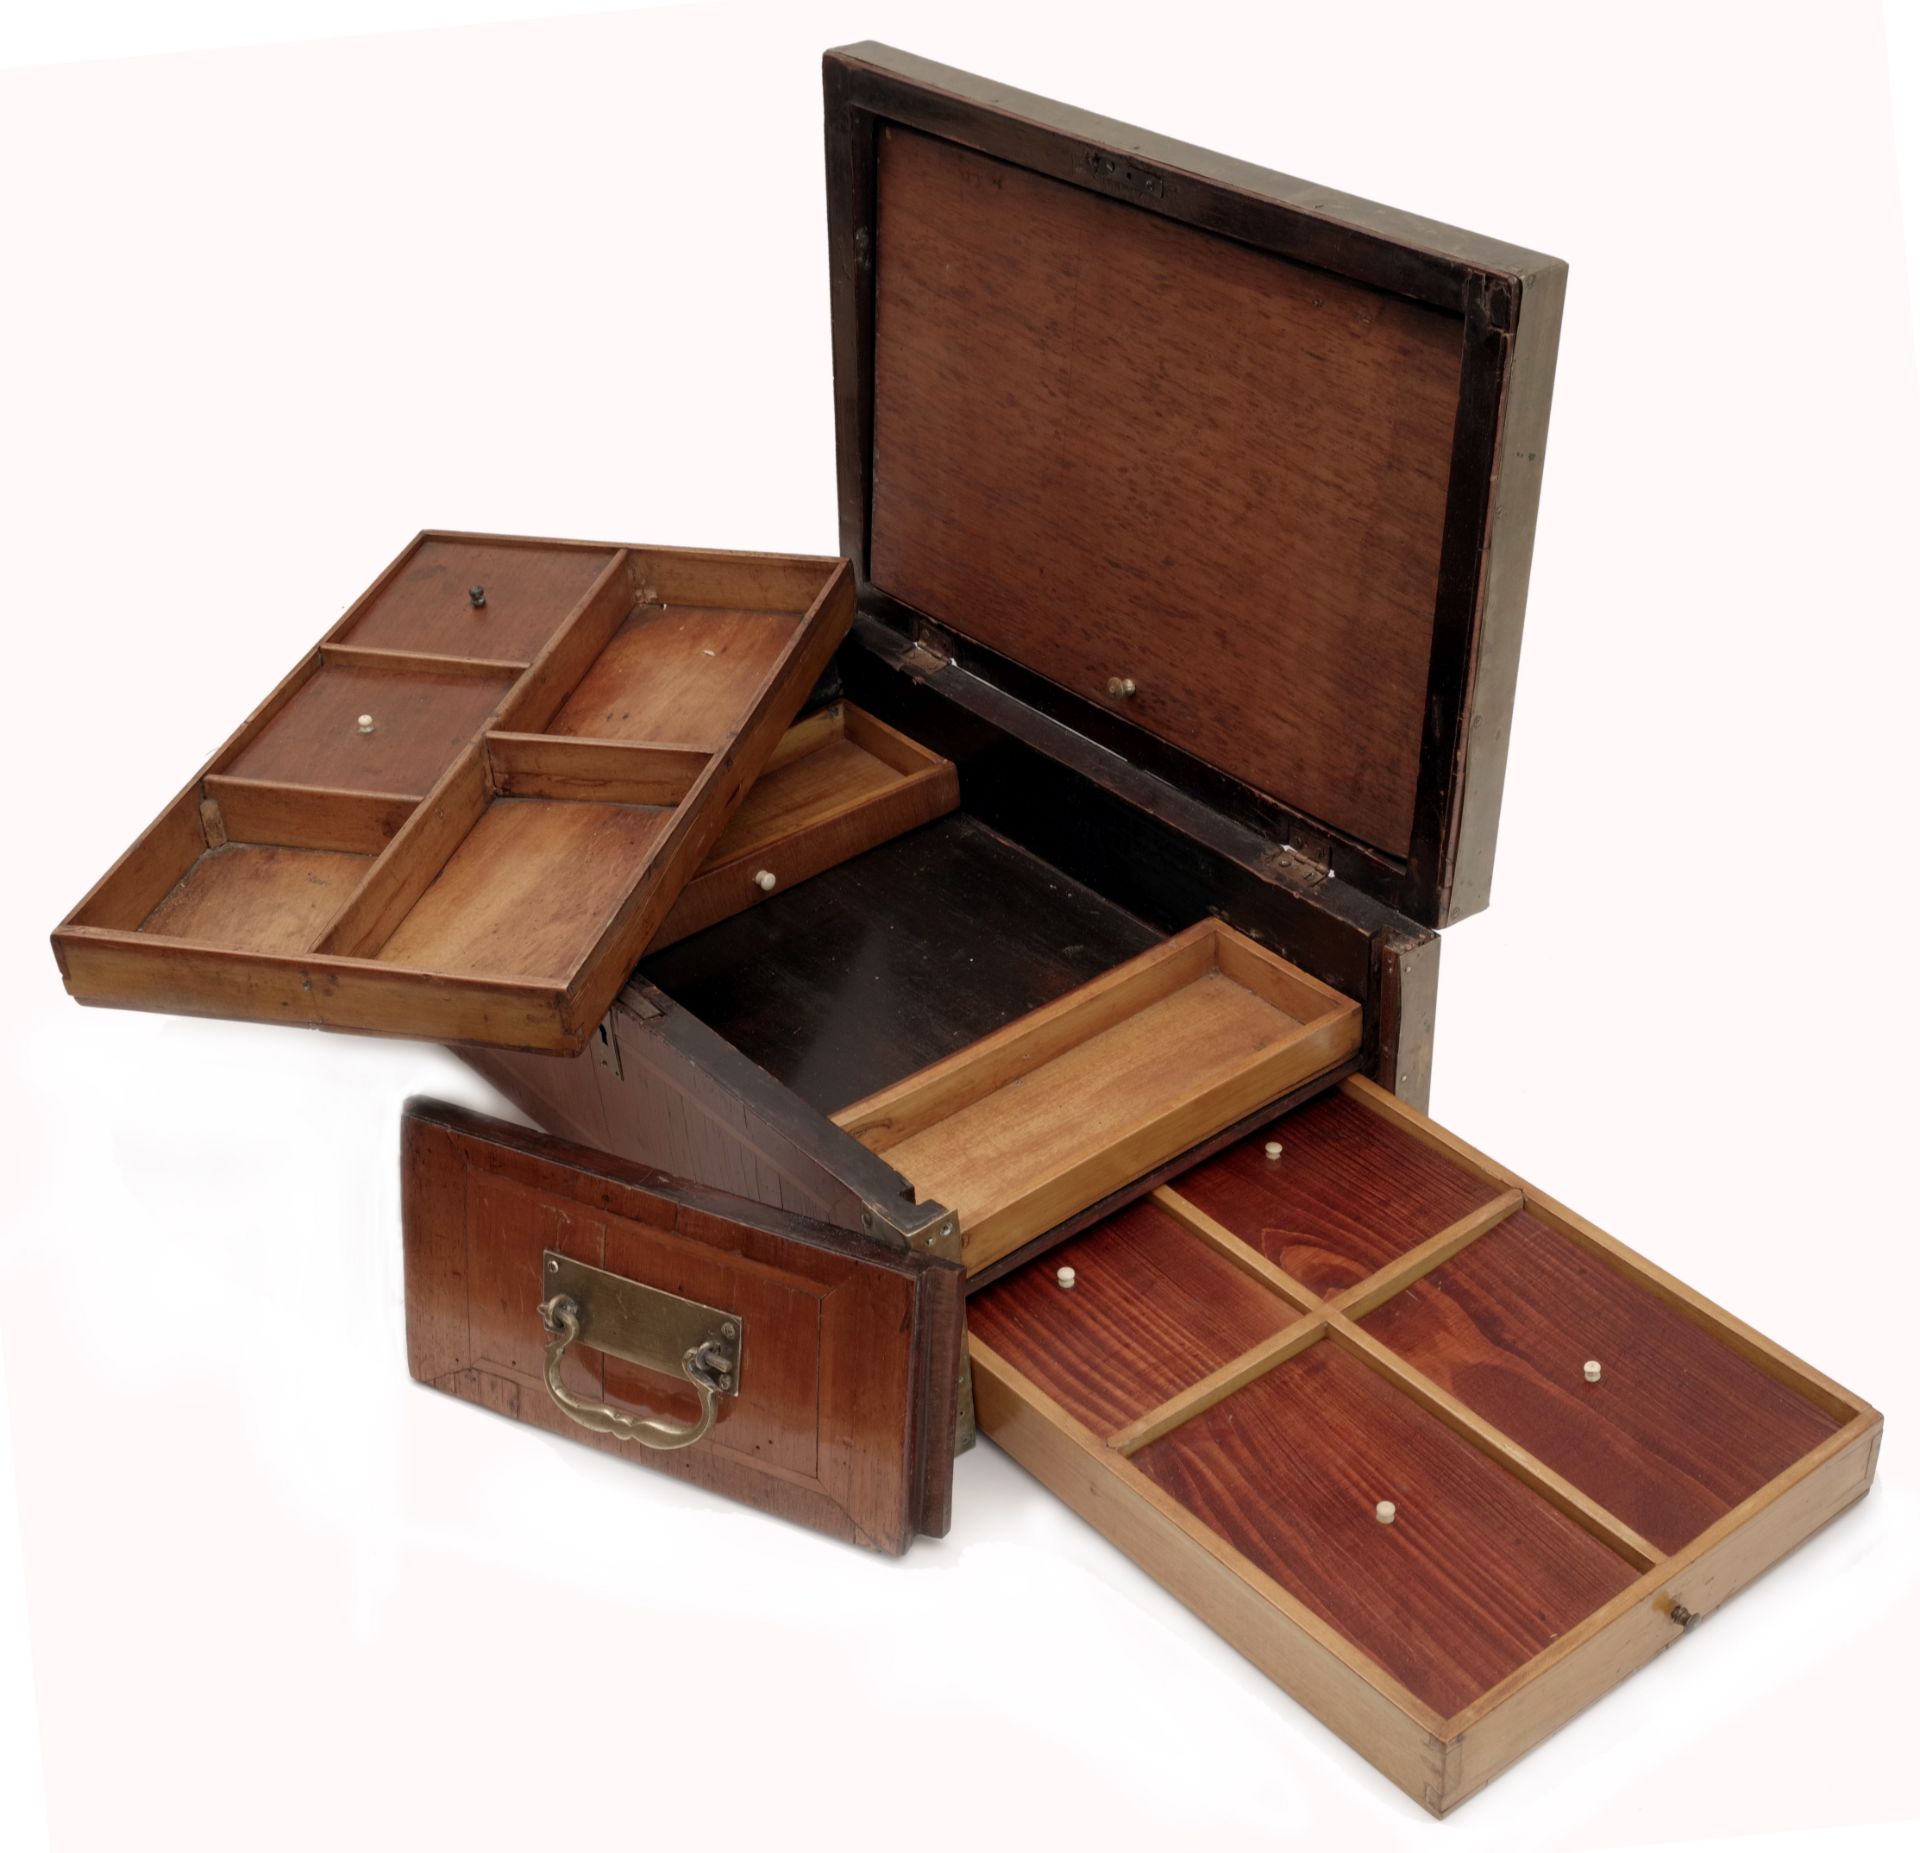 A Jewelry Box with Secret Spaces - Image 4 of 4